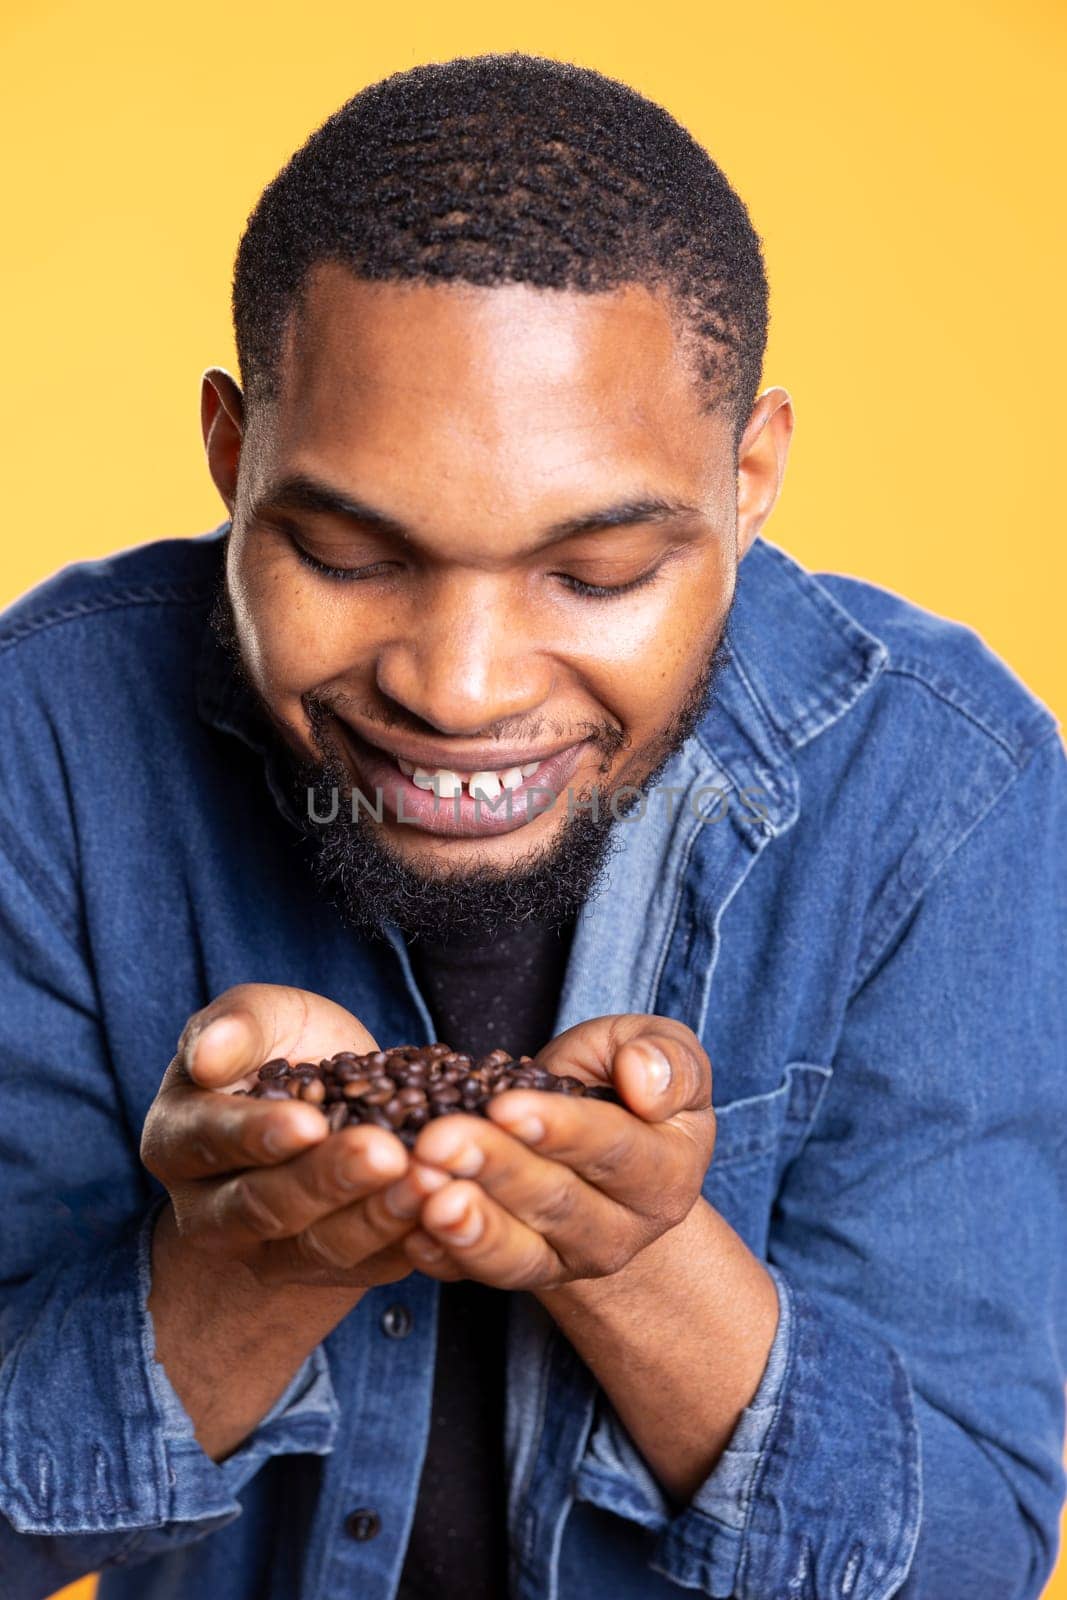 Coffee lover savoring the fresh aromatic black roasted scent, enthusiastic man holding a handful of coffee beans up to his nose and enjoying the c0old brew aroma, delicious flavor.